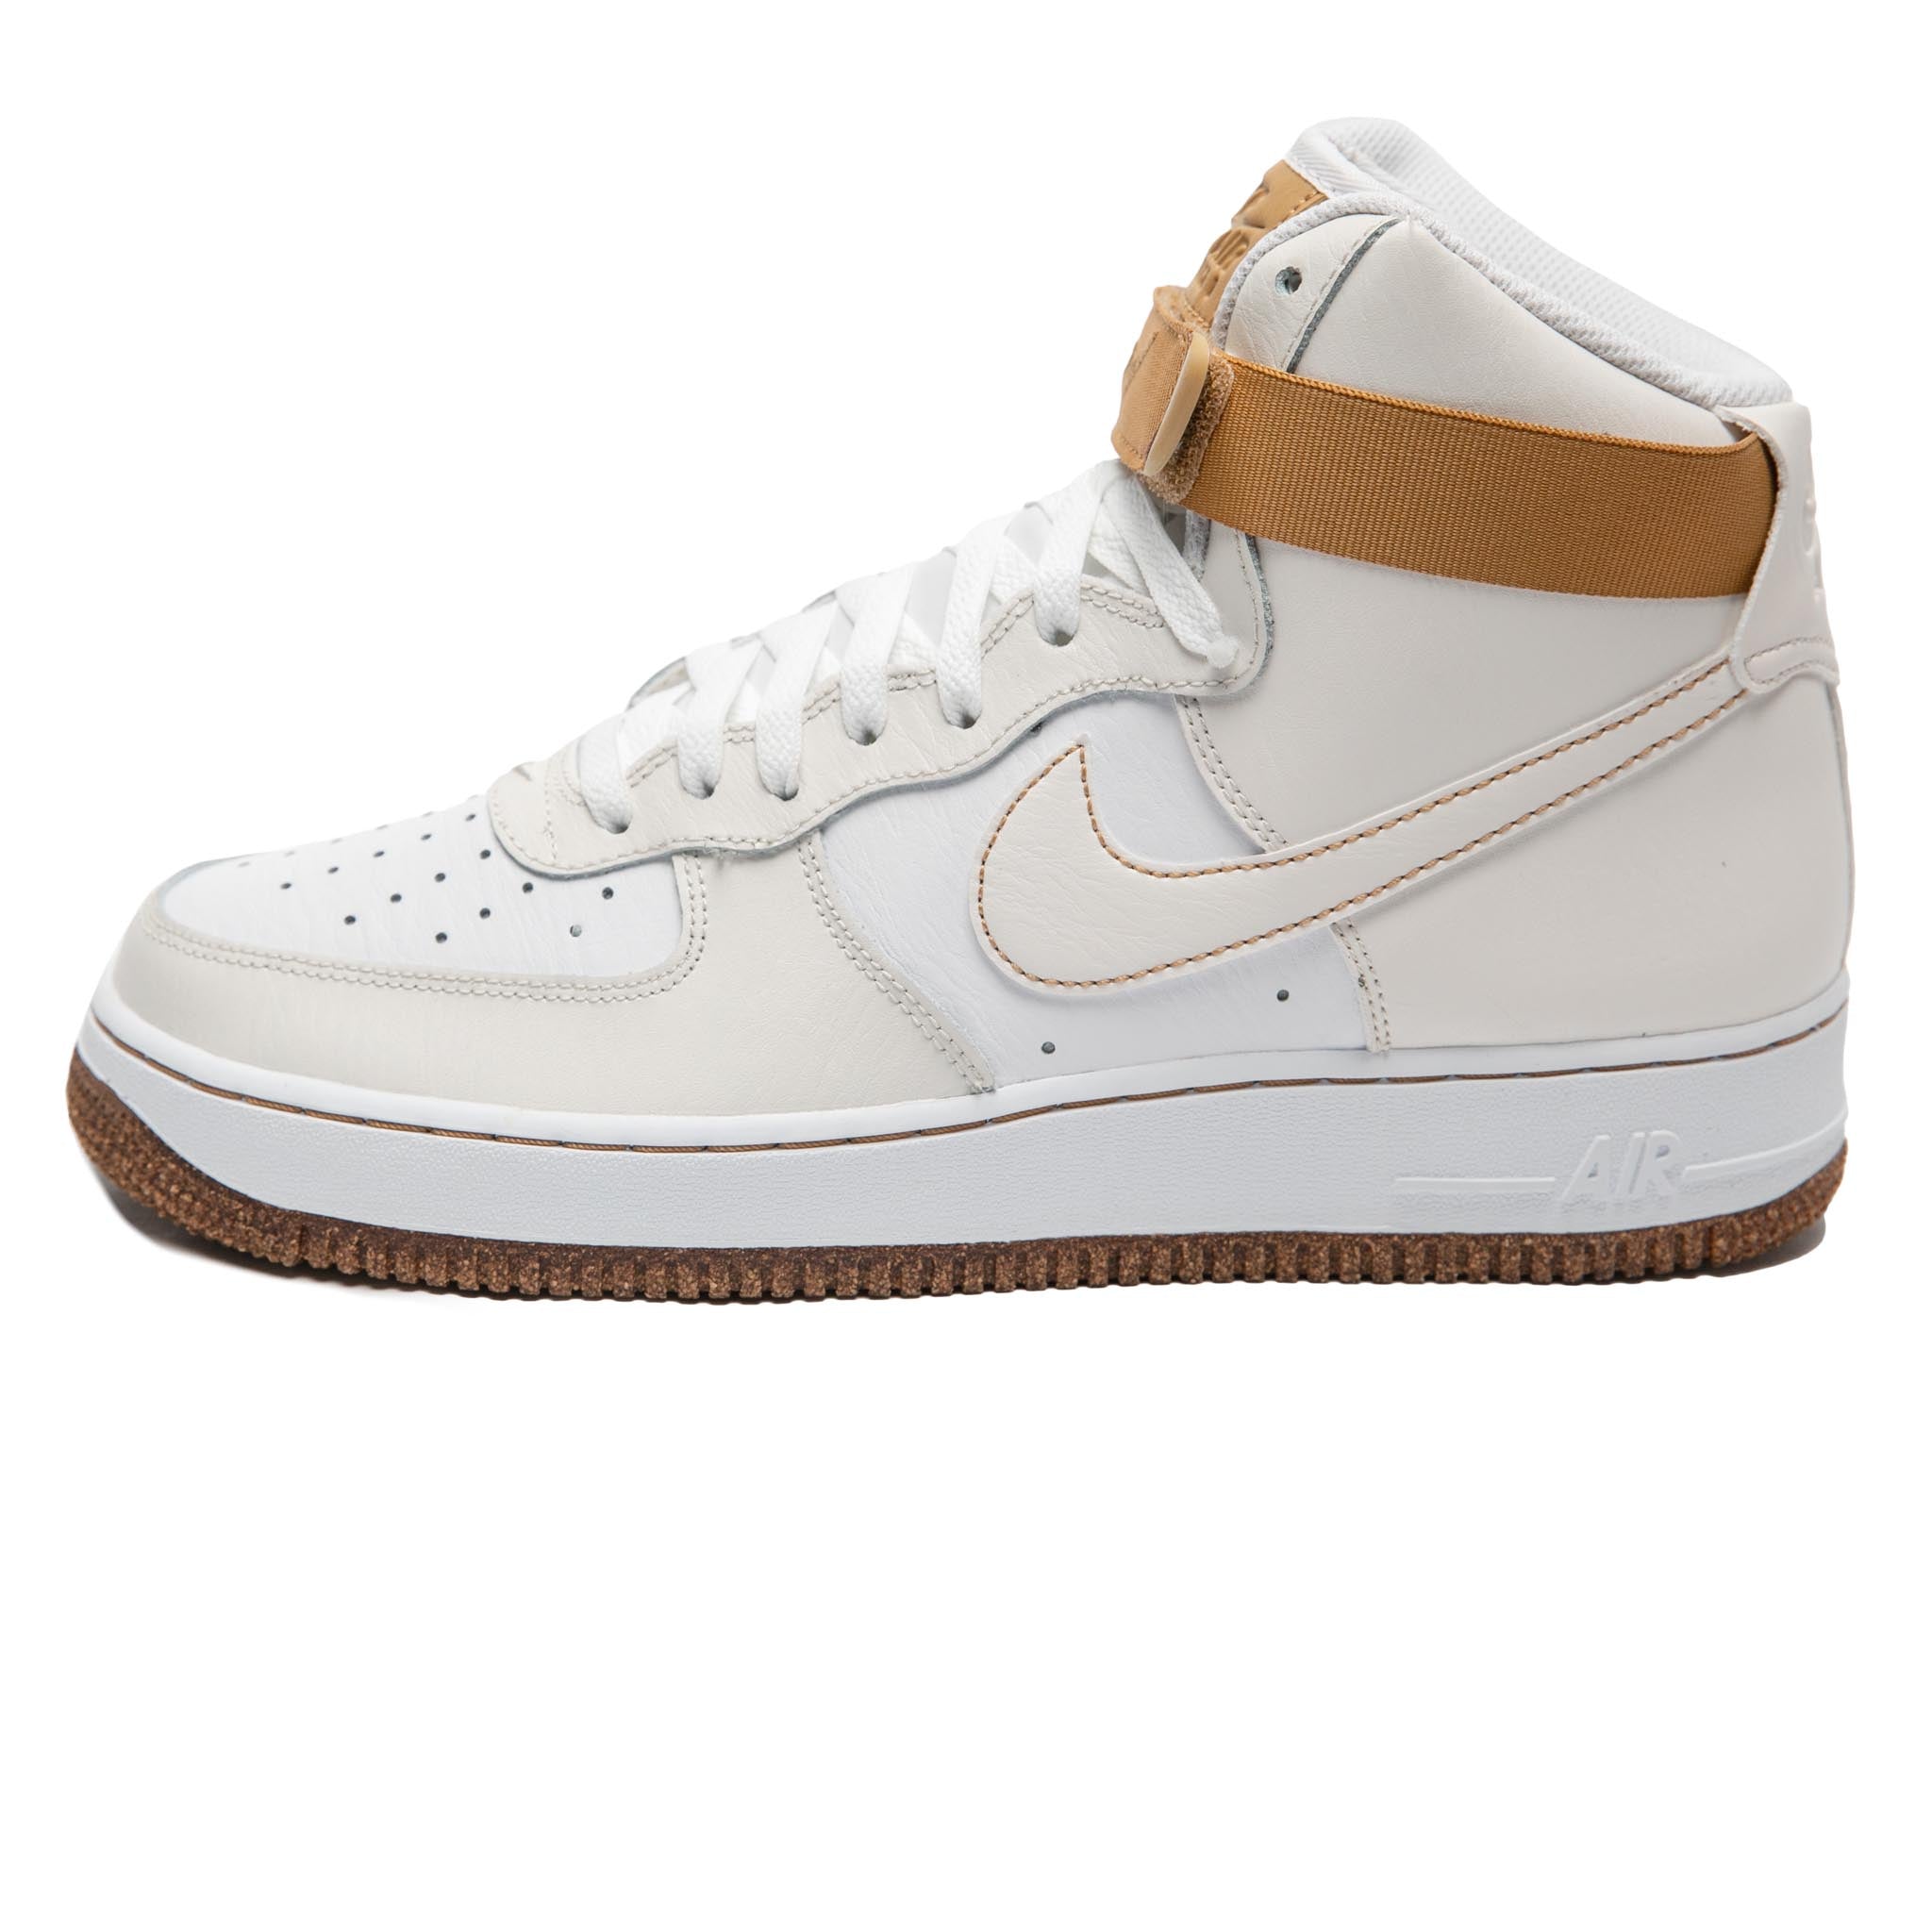 Nike Air Force 1 High 07 EMB 'Inpsected By Swoosh'